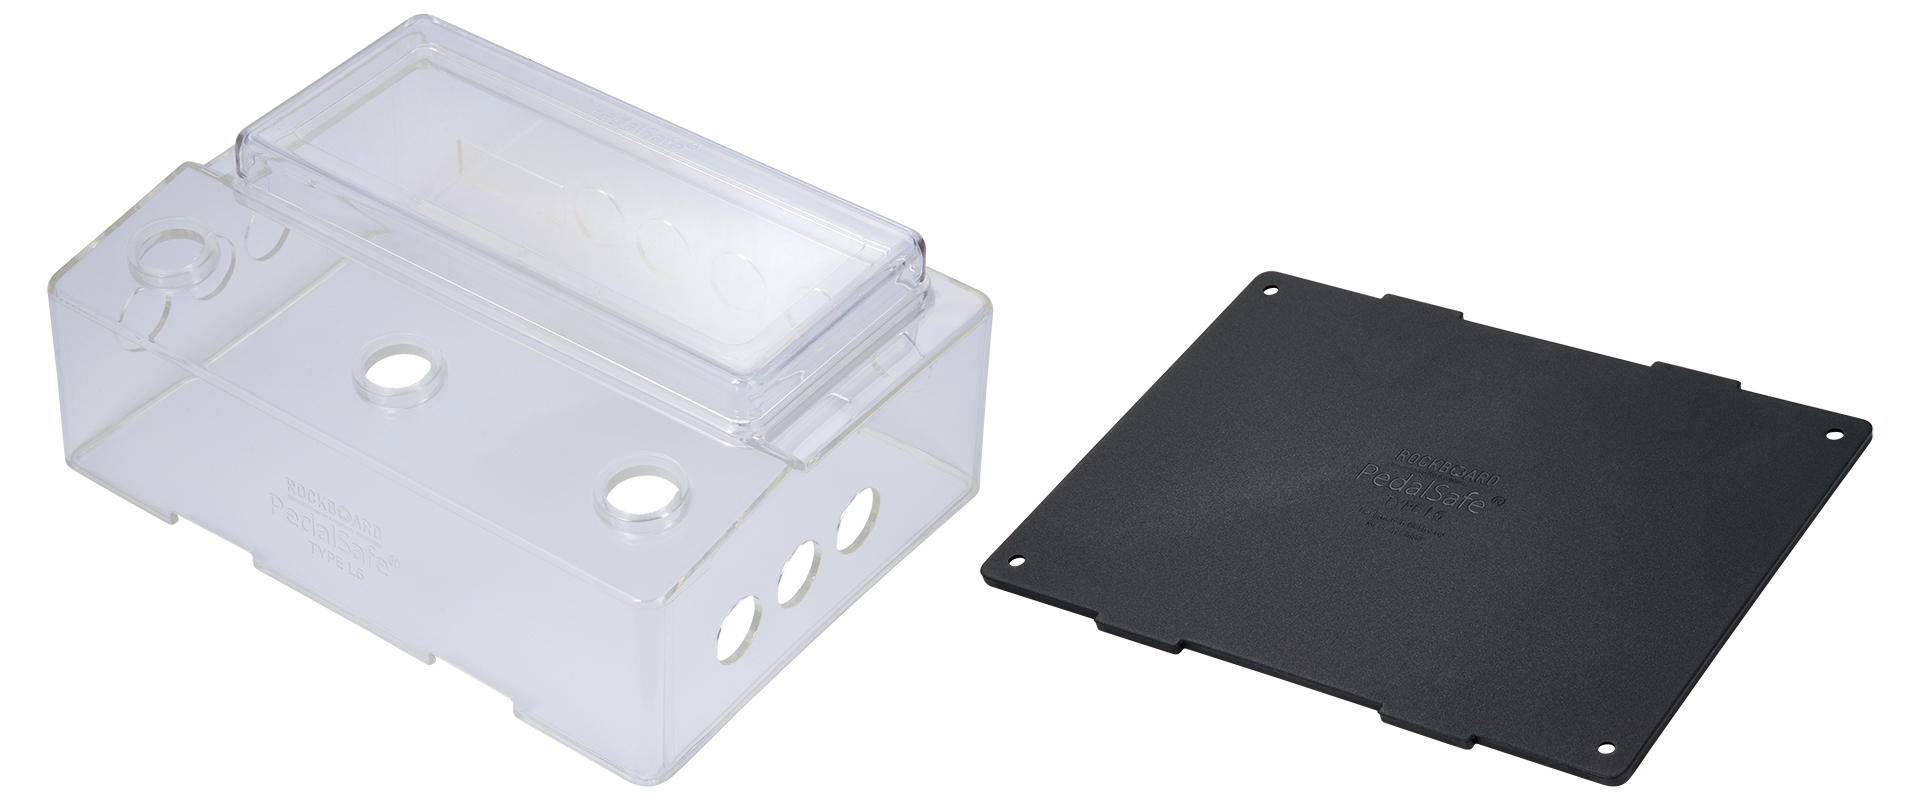 RockBoard PedalSafe Type L6 - Protective Cover and Universal Mounting Plate for LINE6 HX Stomp pedals